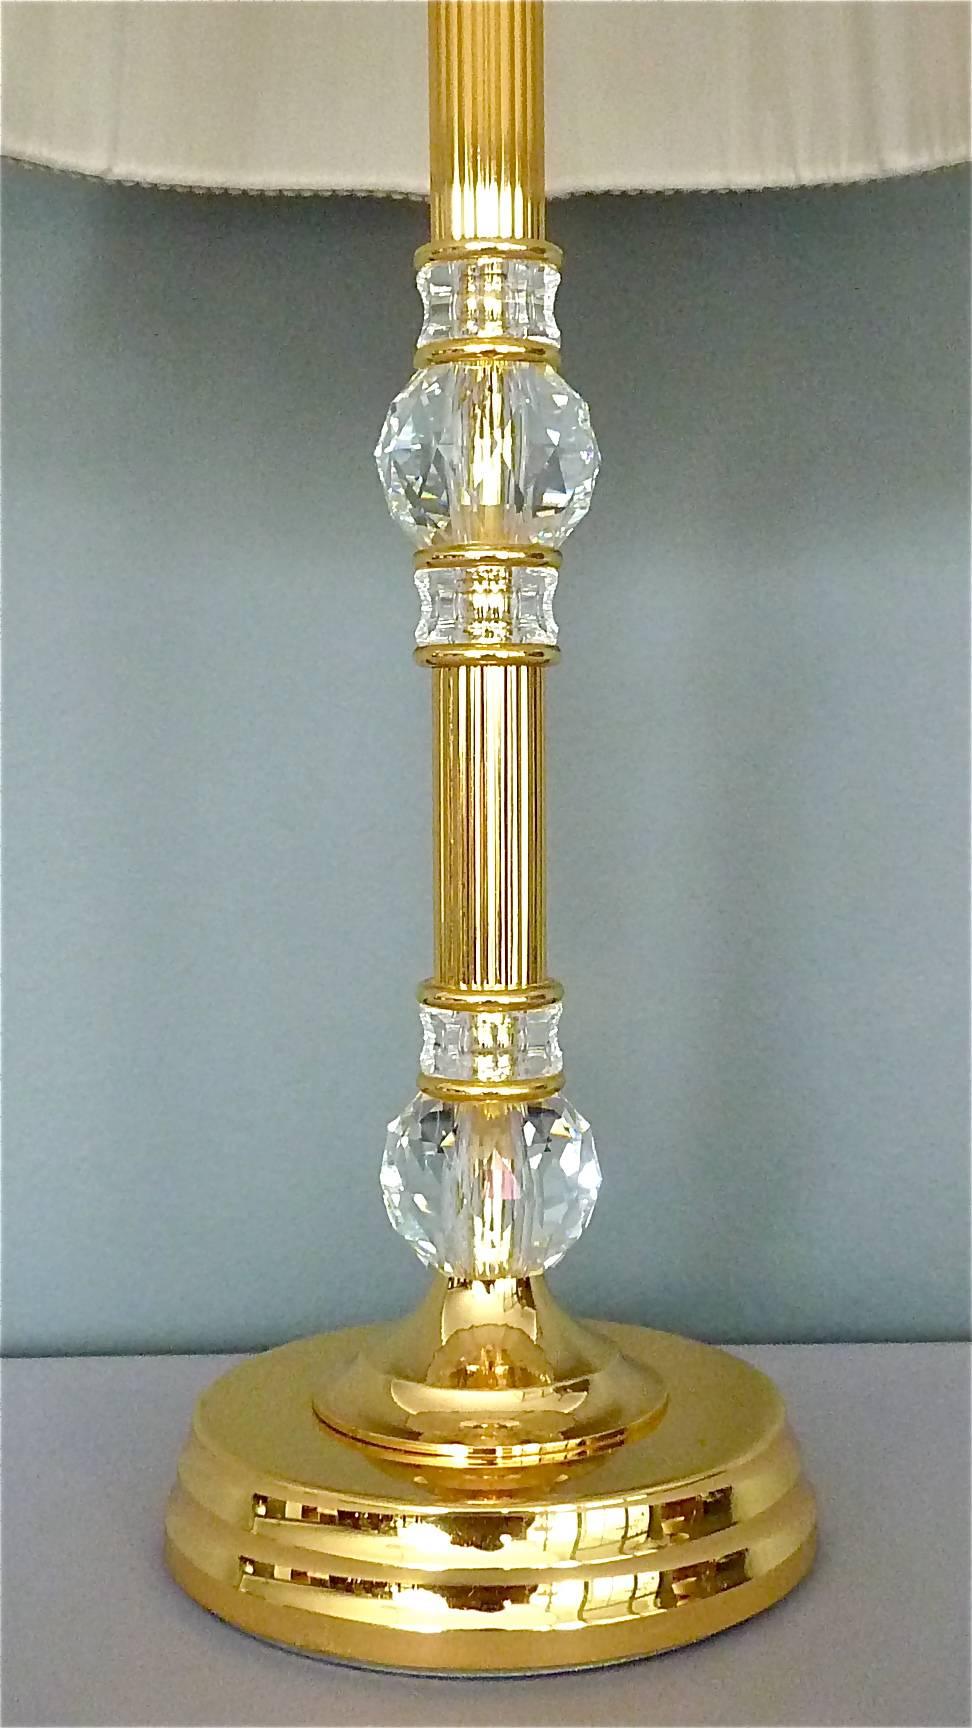 Fine and noble table lamp made by Palwa, Germany, circa 1970. It has a gilt brass metal base and stem with big beautifully hand-cut and polished facetted crystal glass ball insets which sparkle like diamonds, on top a very expensive, classy and